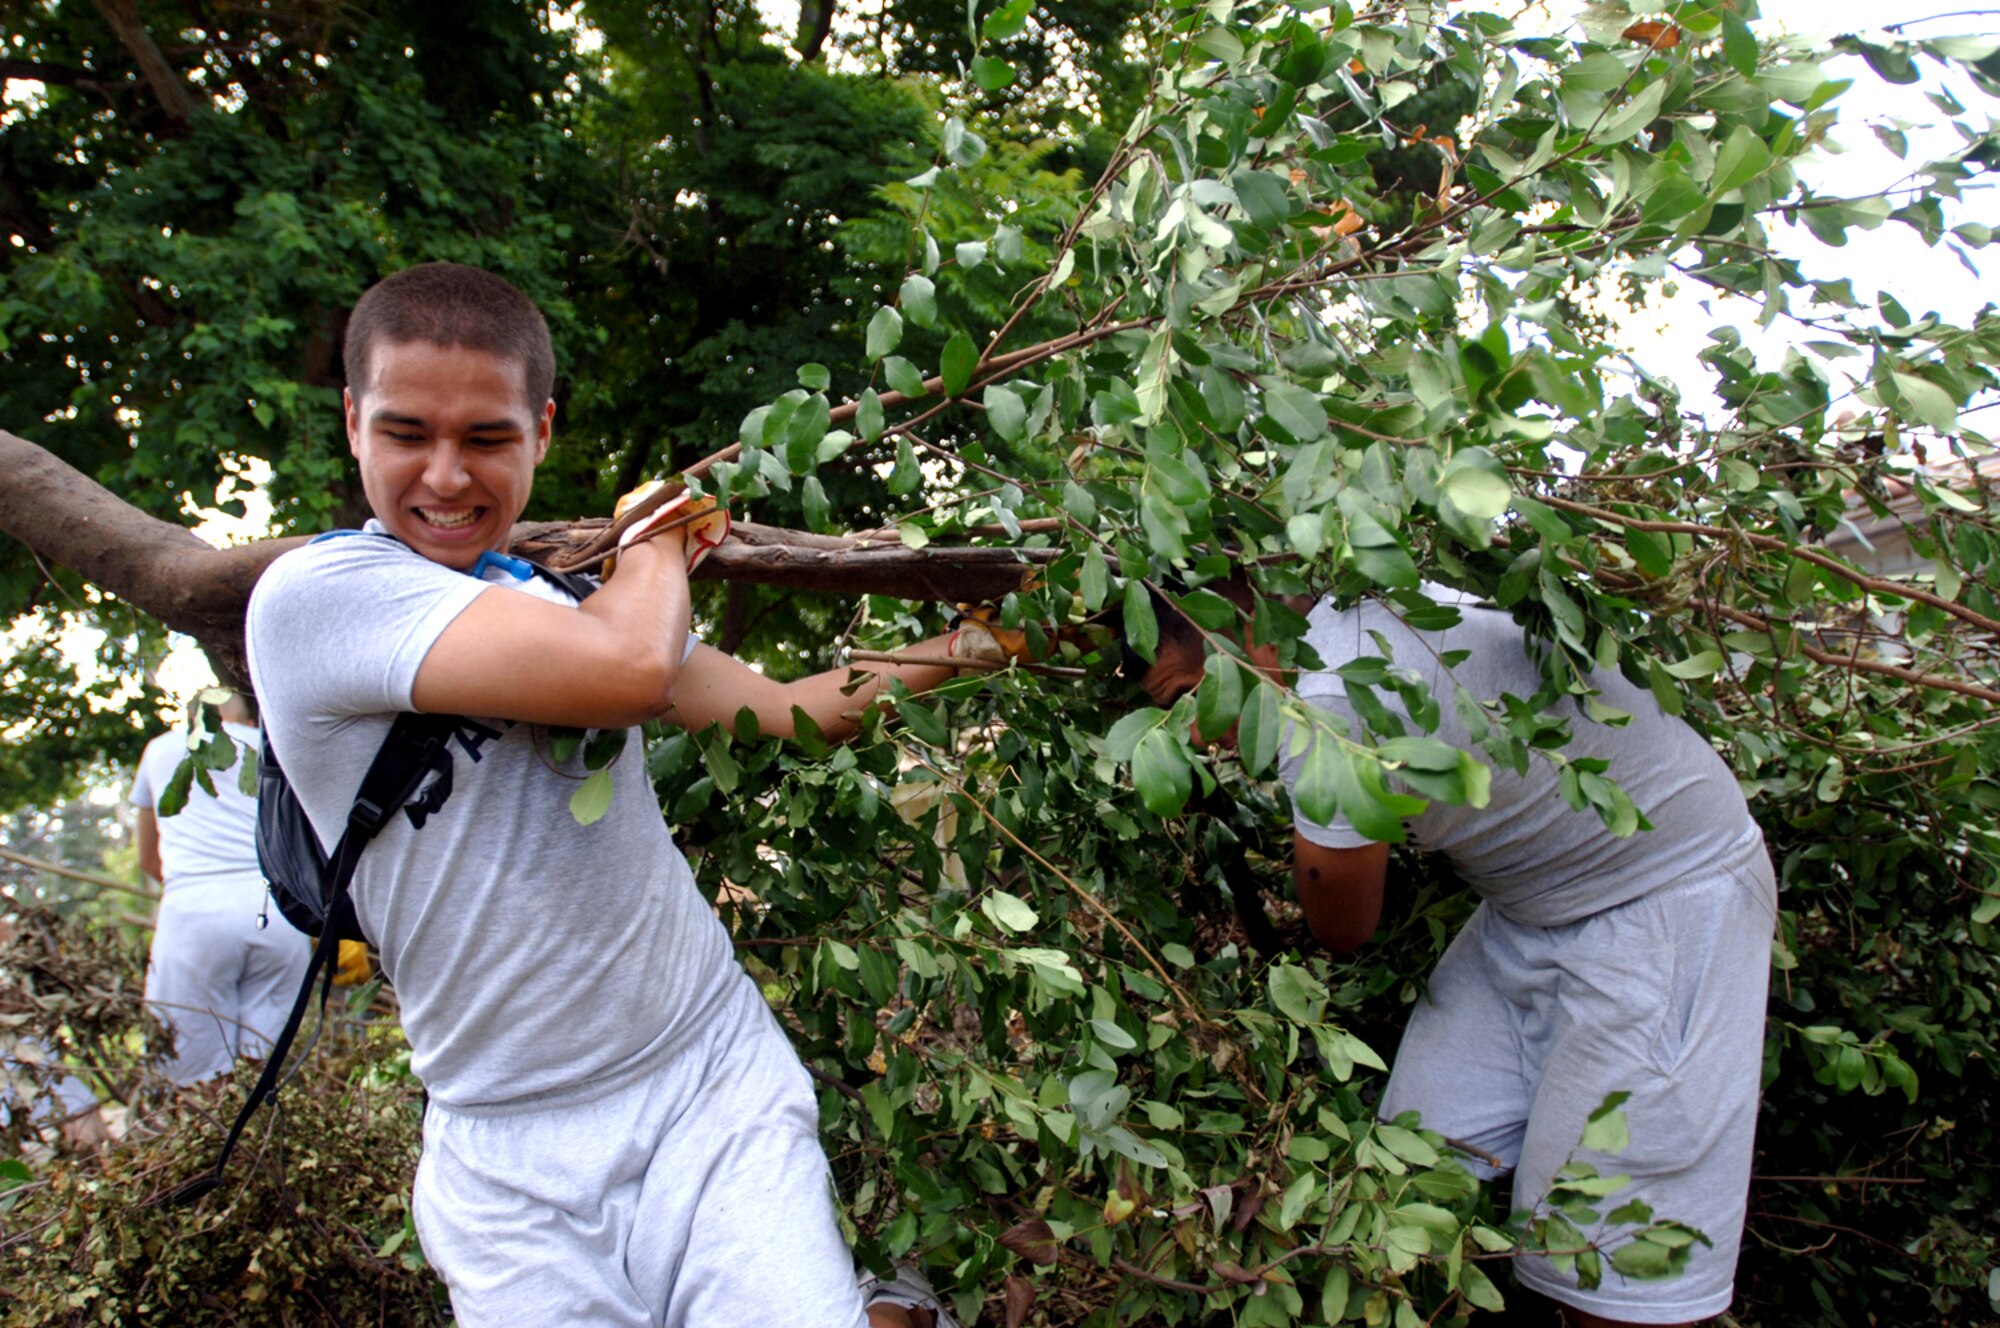 Airmen Basic Wilder Mata and Frank Morales clear the brush in the front yard of a house in Biloxi, Miss., Aug. 25. The civilian's home was heavily damaged by Hurricane Katrina one year ago. The Airmen are trainees with the 332nd Training Squadron at Keesler Air Force Base, Miss. (U.S. Air Force photo/Tech. Sgt. Cecilio Ricardo Jr.)